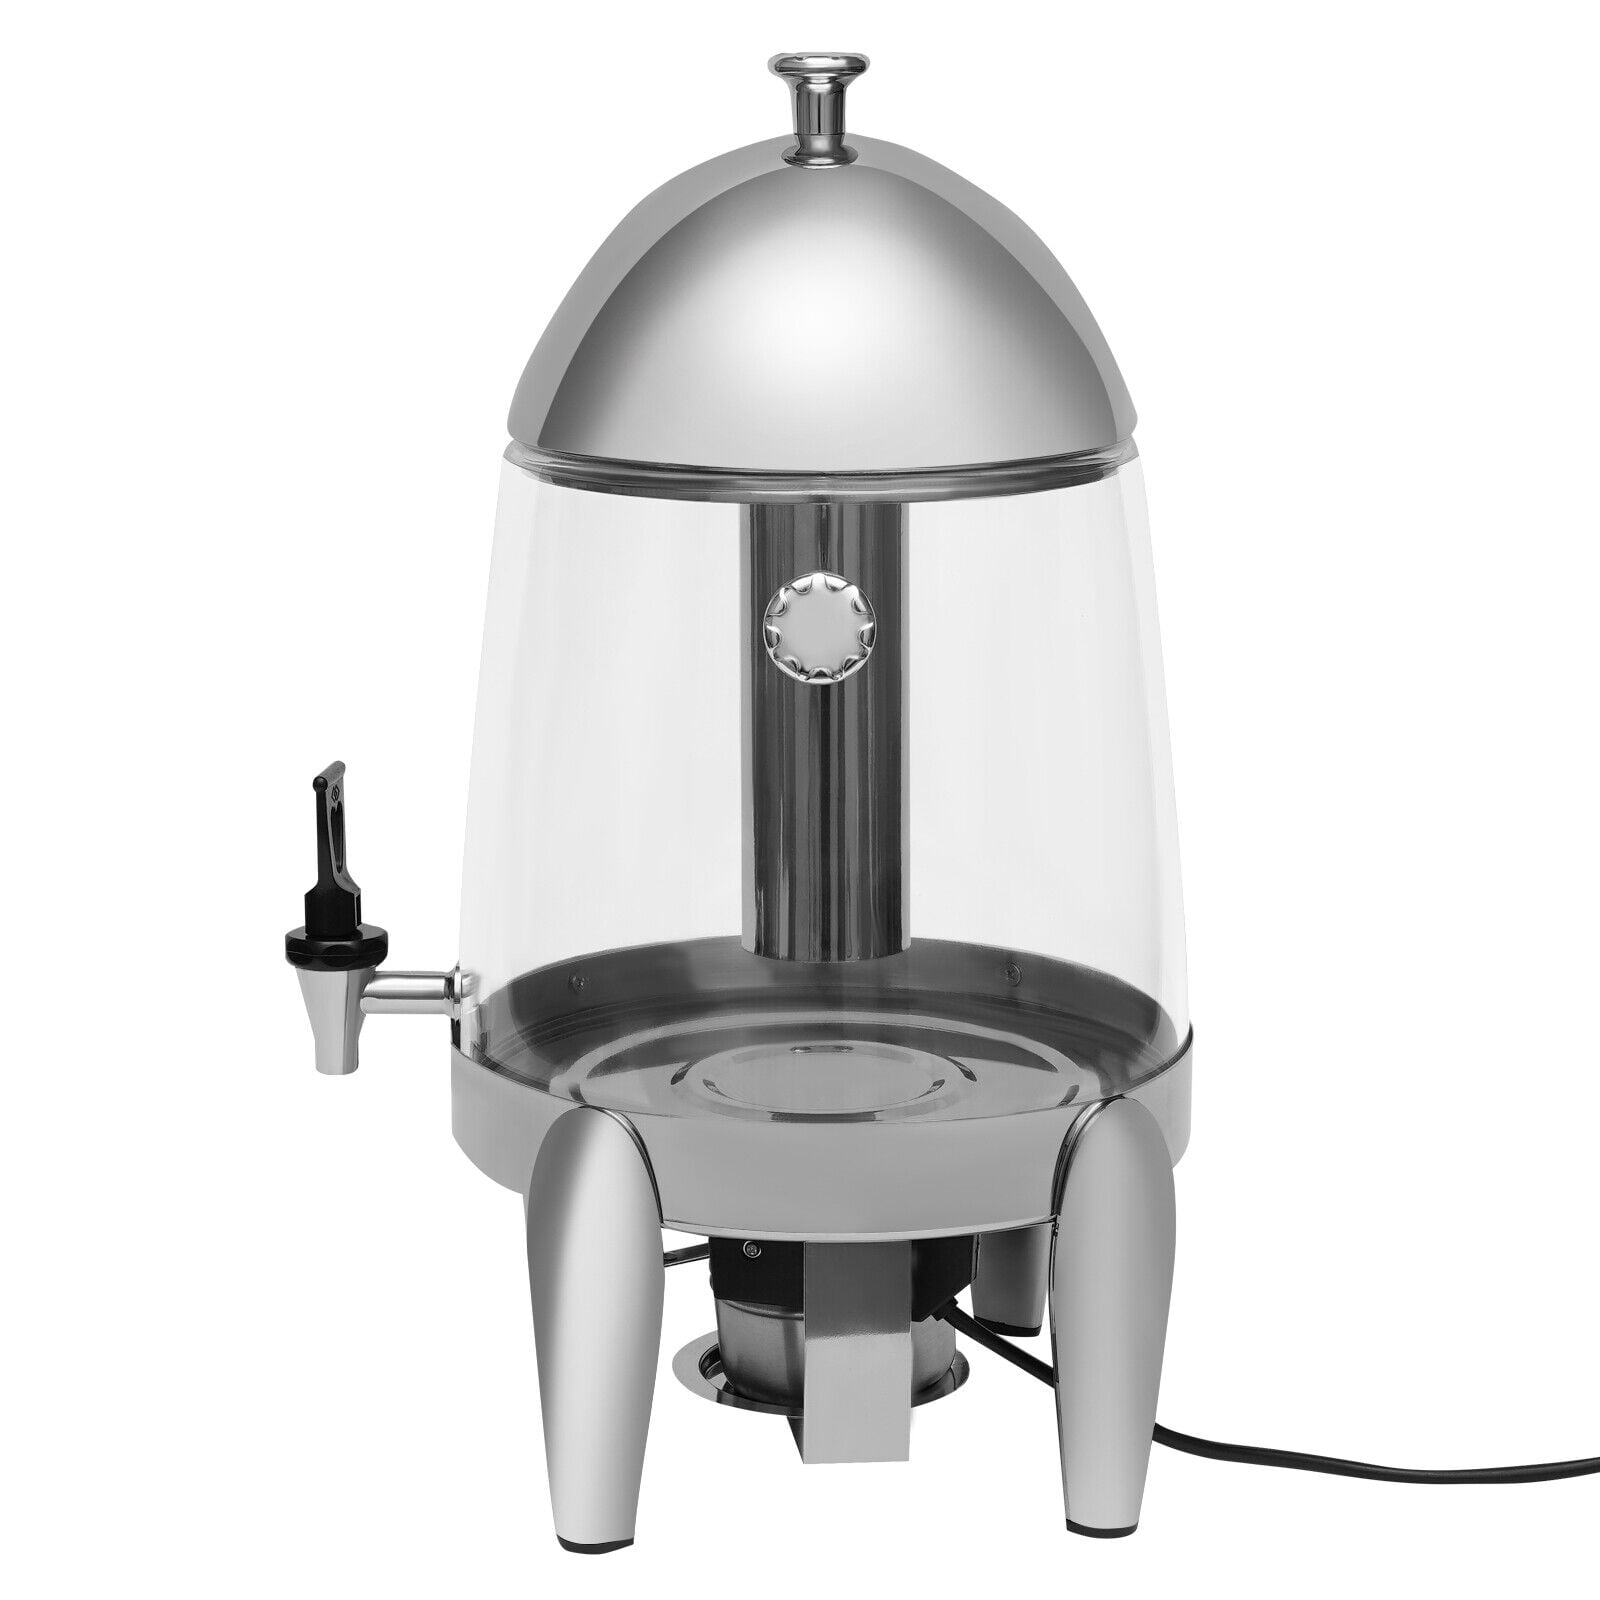 BriSunshine 12 L Coffee Urn and Hot Beverage Dispenser,  Stainless Steel Coffee Chafer Urn Hot Drinks Dispenser with Spigot for  Parties Event Buffet Catering (3.2 Gallon, About 48 Cup): Coffee Urns